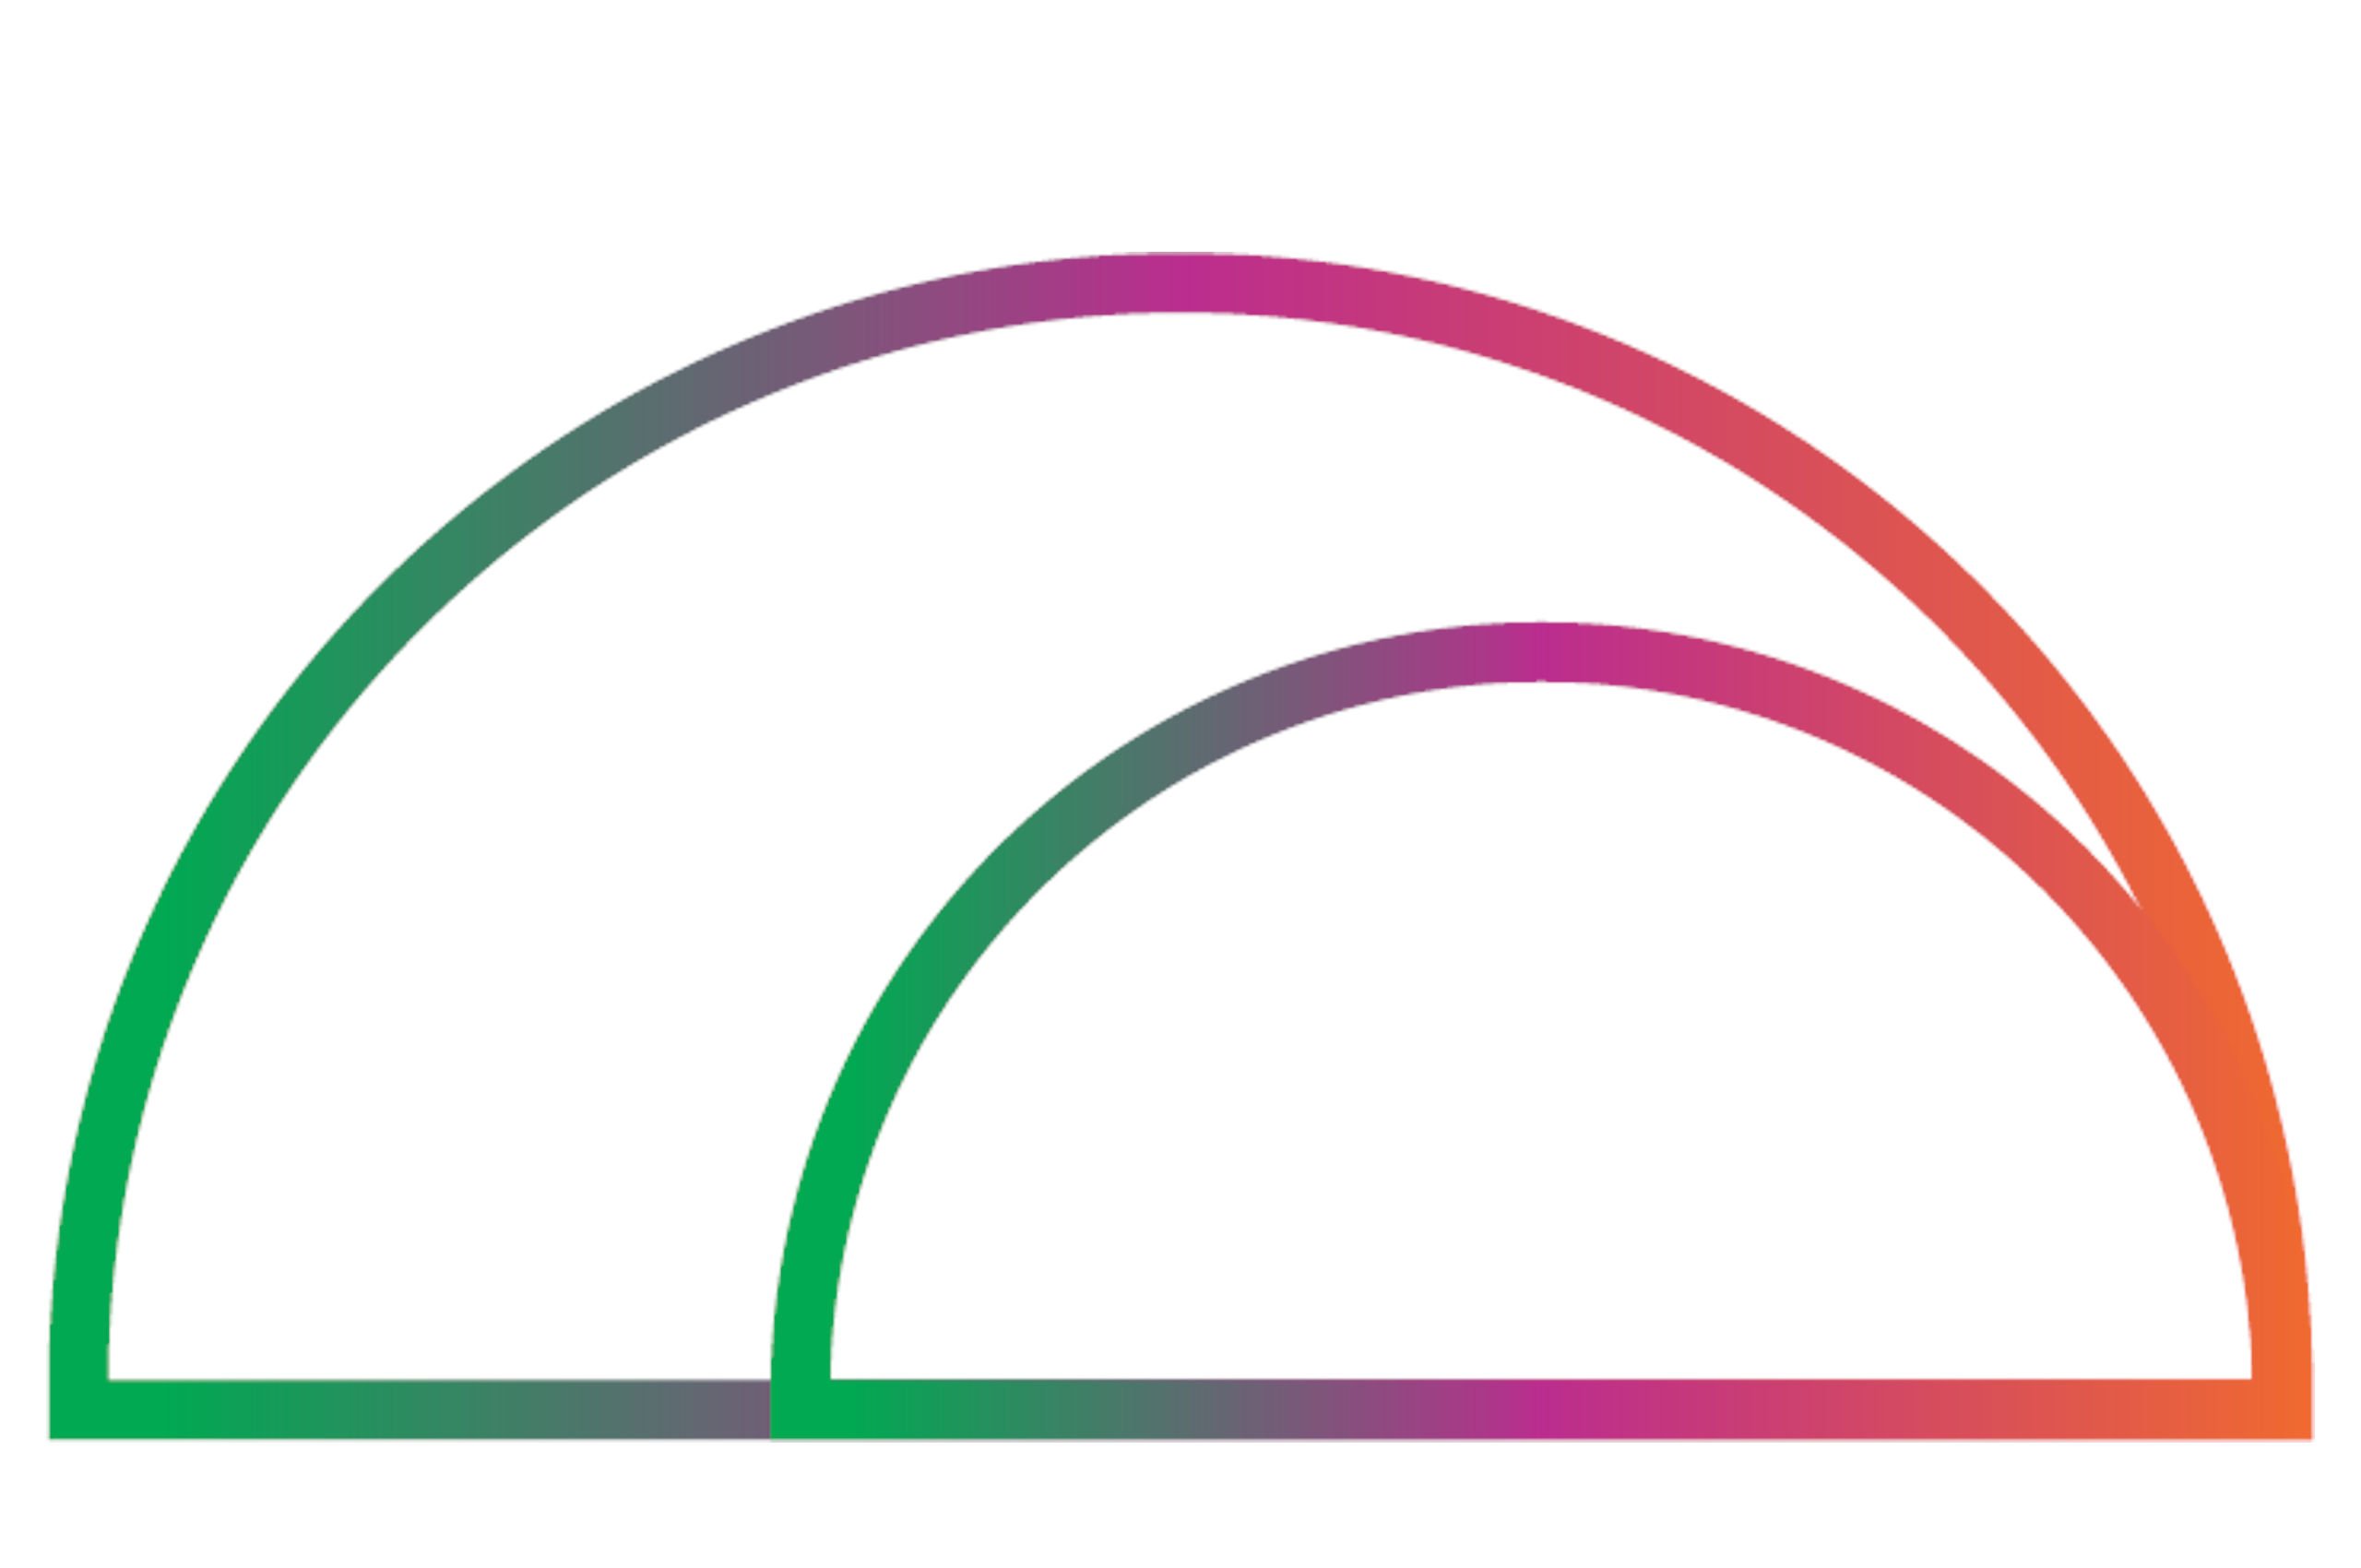 Double arch design in rainbow of green, orange and purple